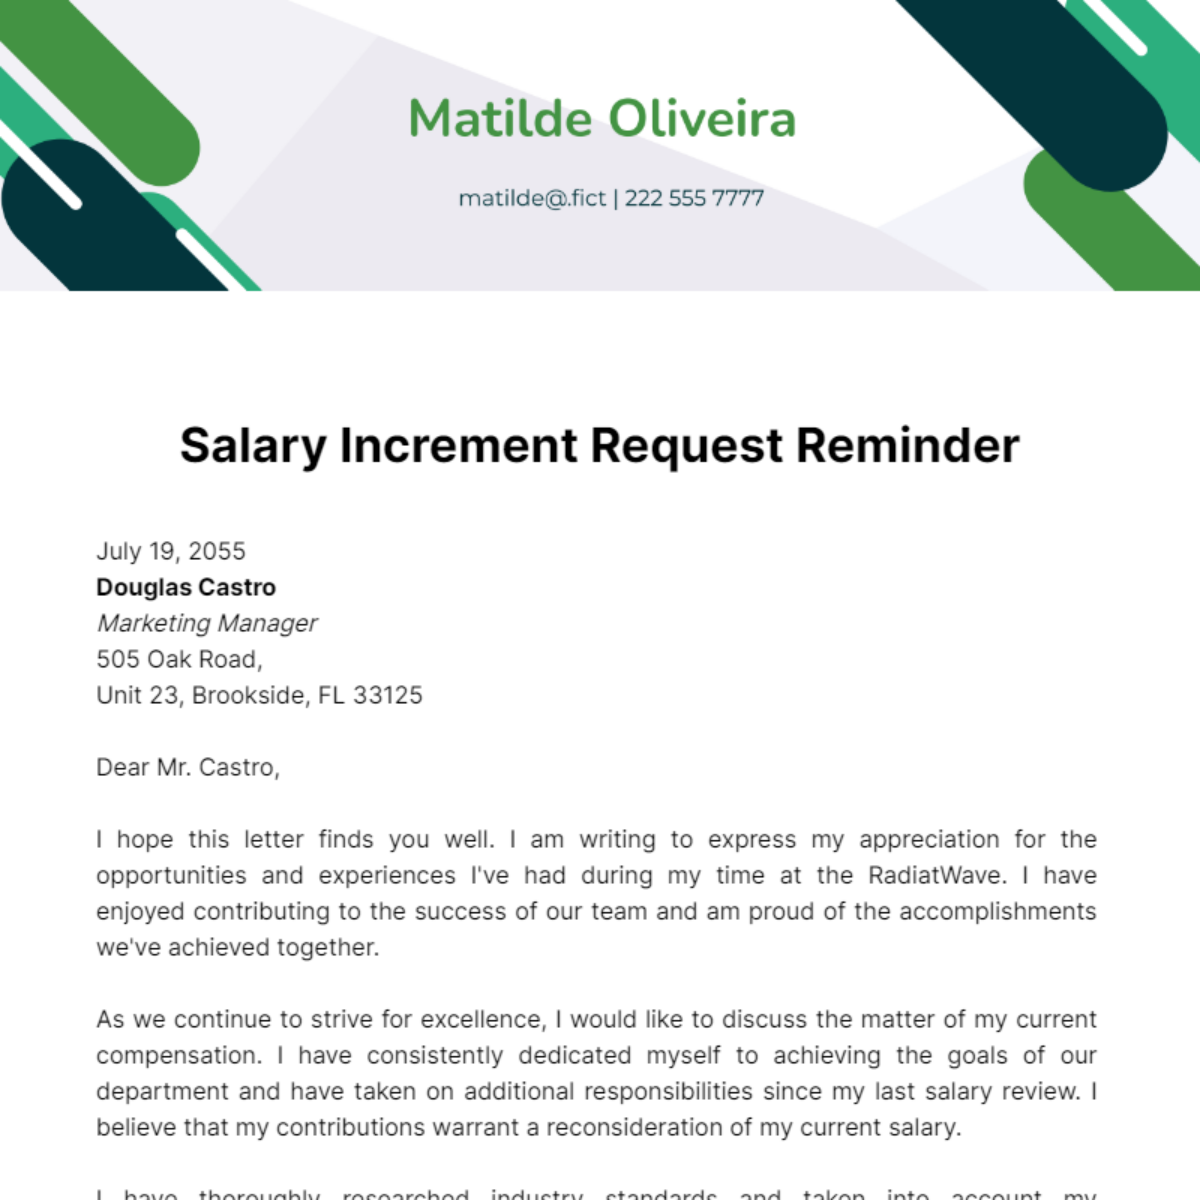 Free Salary Increment Request Reminder Letter Template